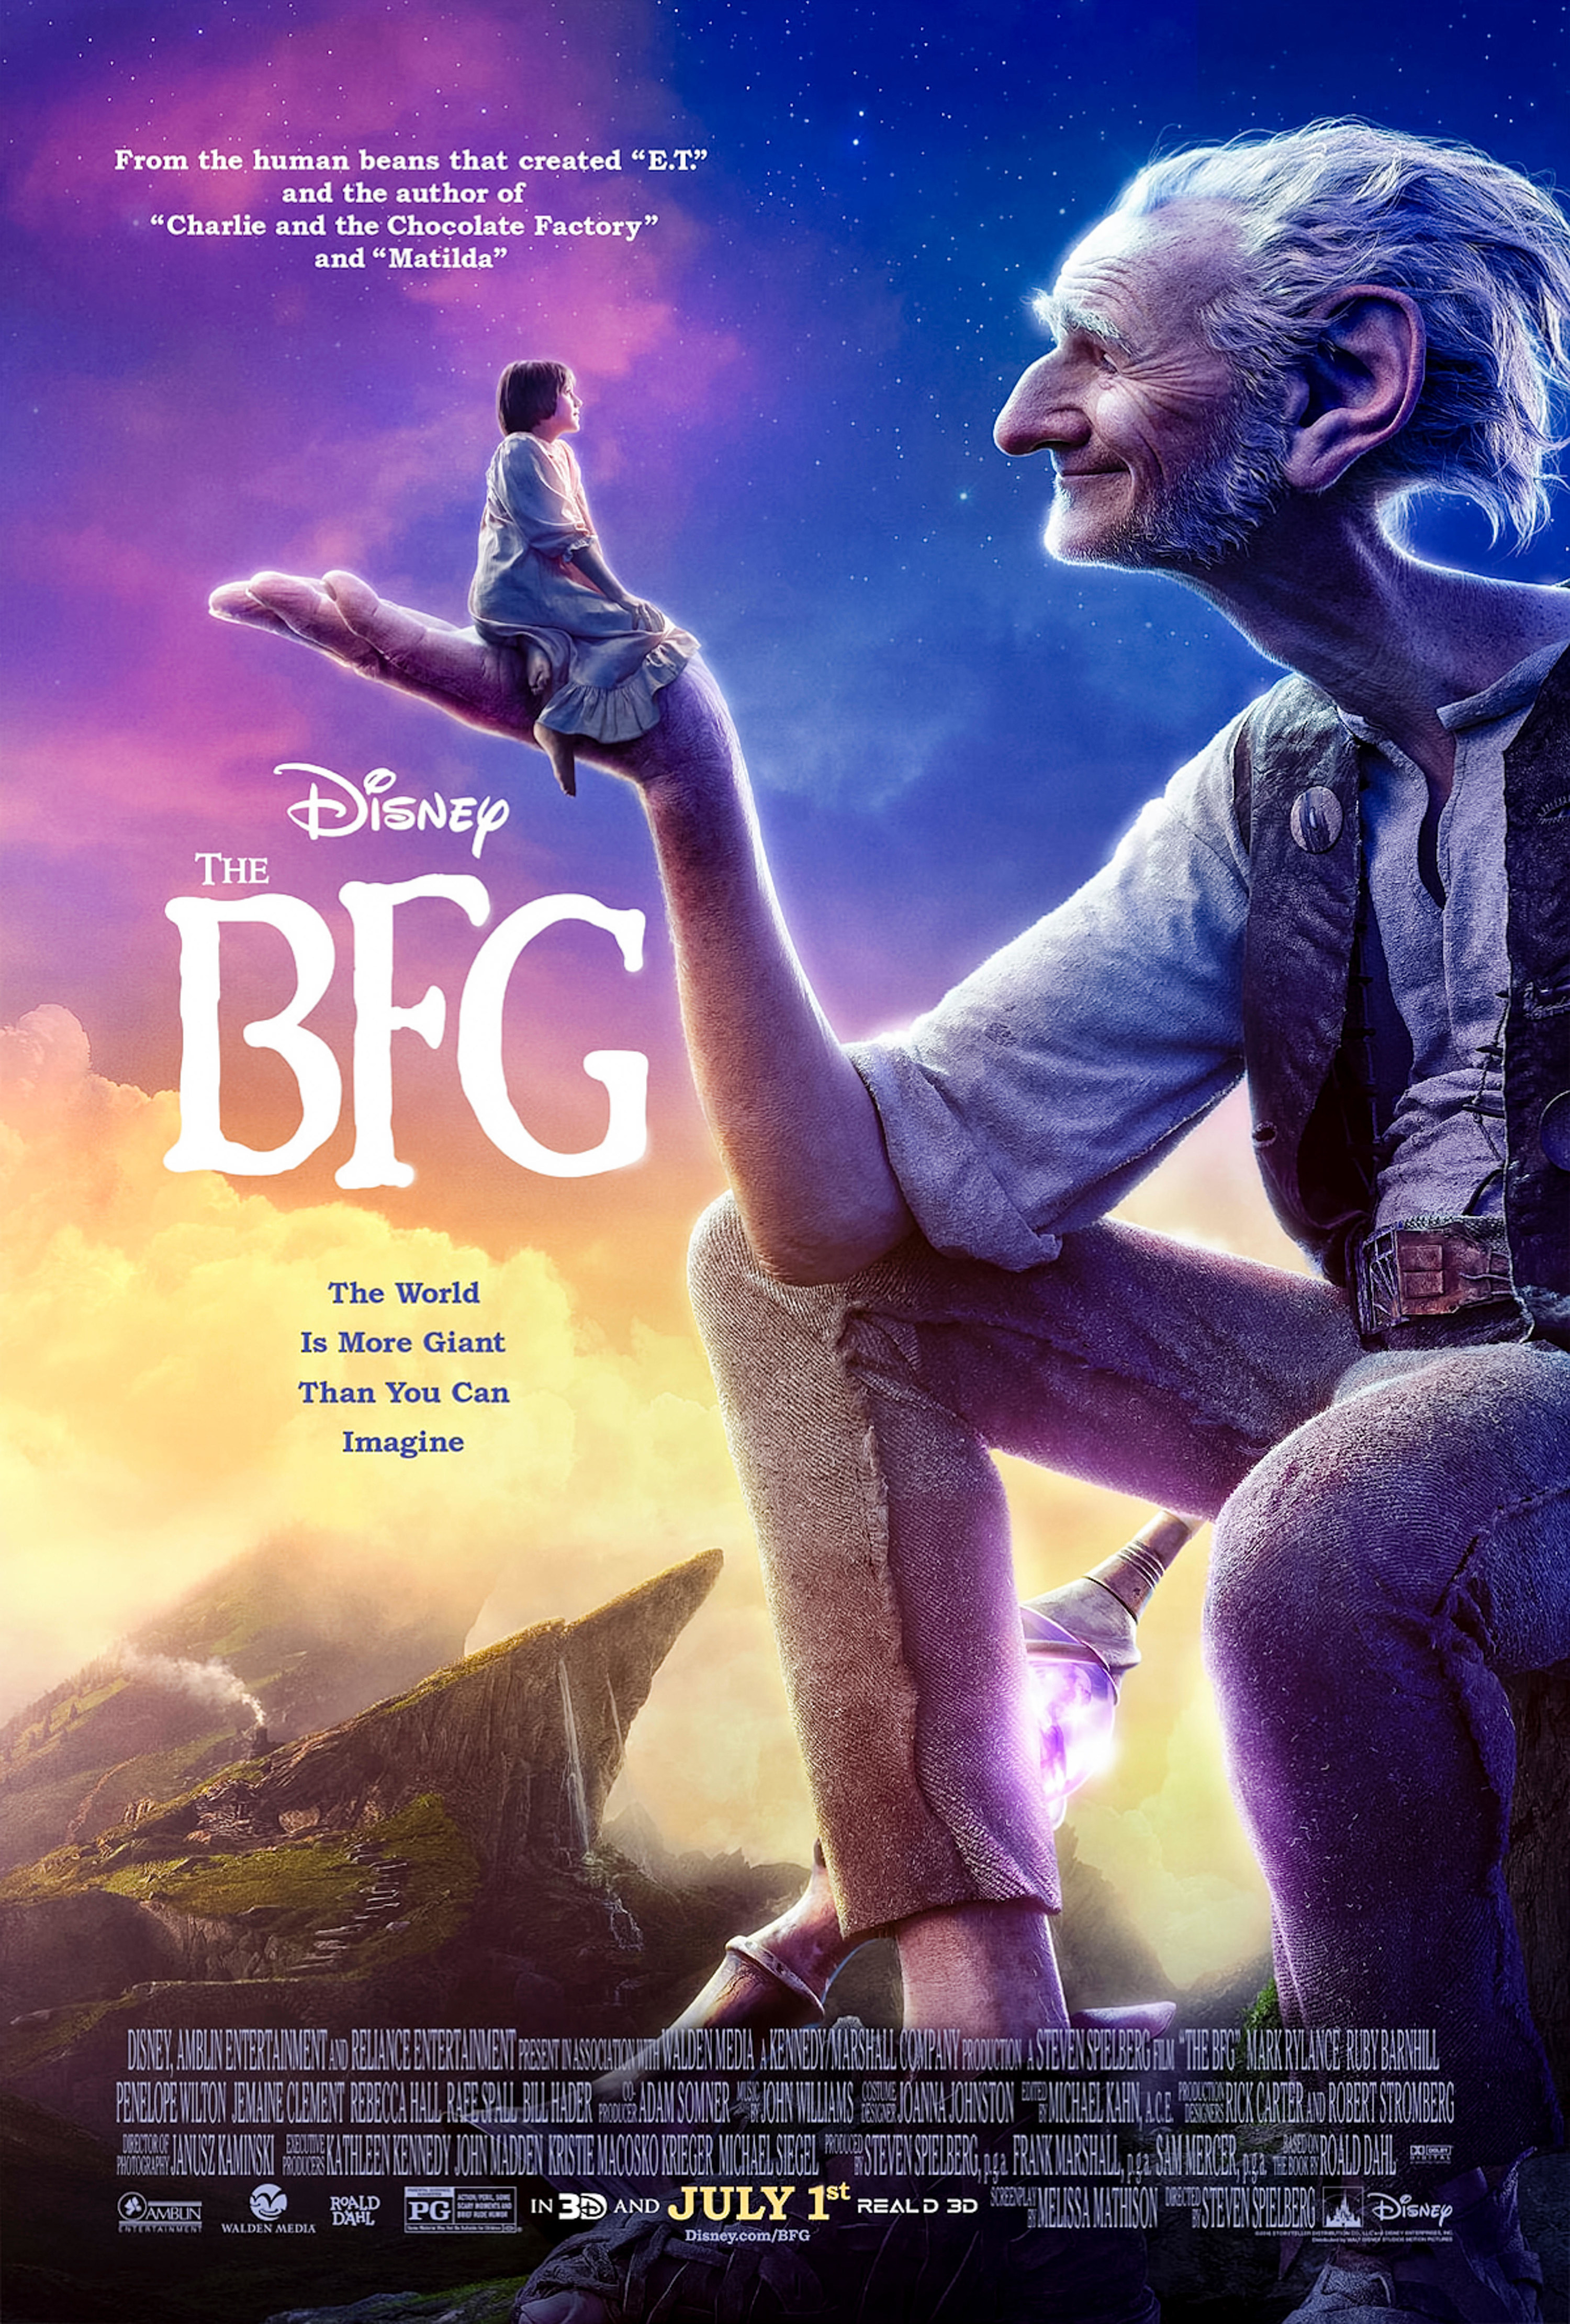 The BFG (2016) directed by Steven Spielberg and starring Mark Rylance, Ruby Barnhill and Penelope Wilton. An orphaned girl Sophie and the Big Friendly Giant and Sophie set out on an adventure in Giant Country and stop the bad giants entering our world.